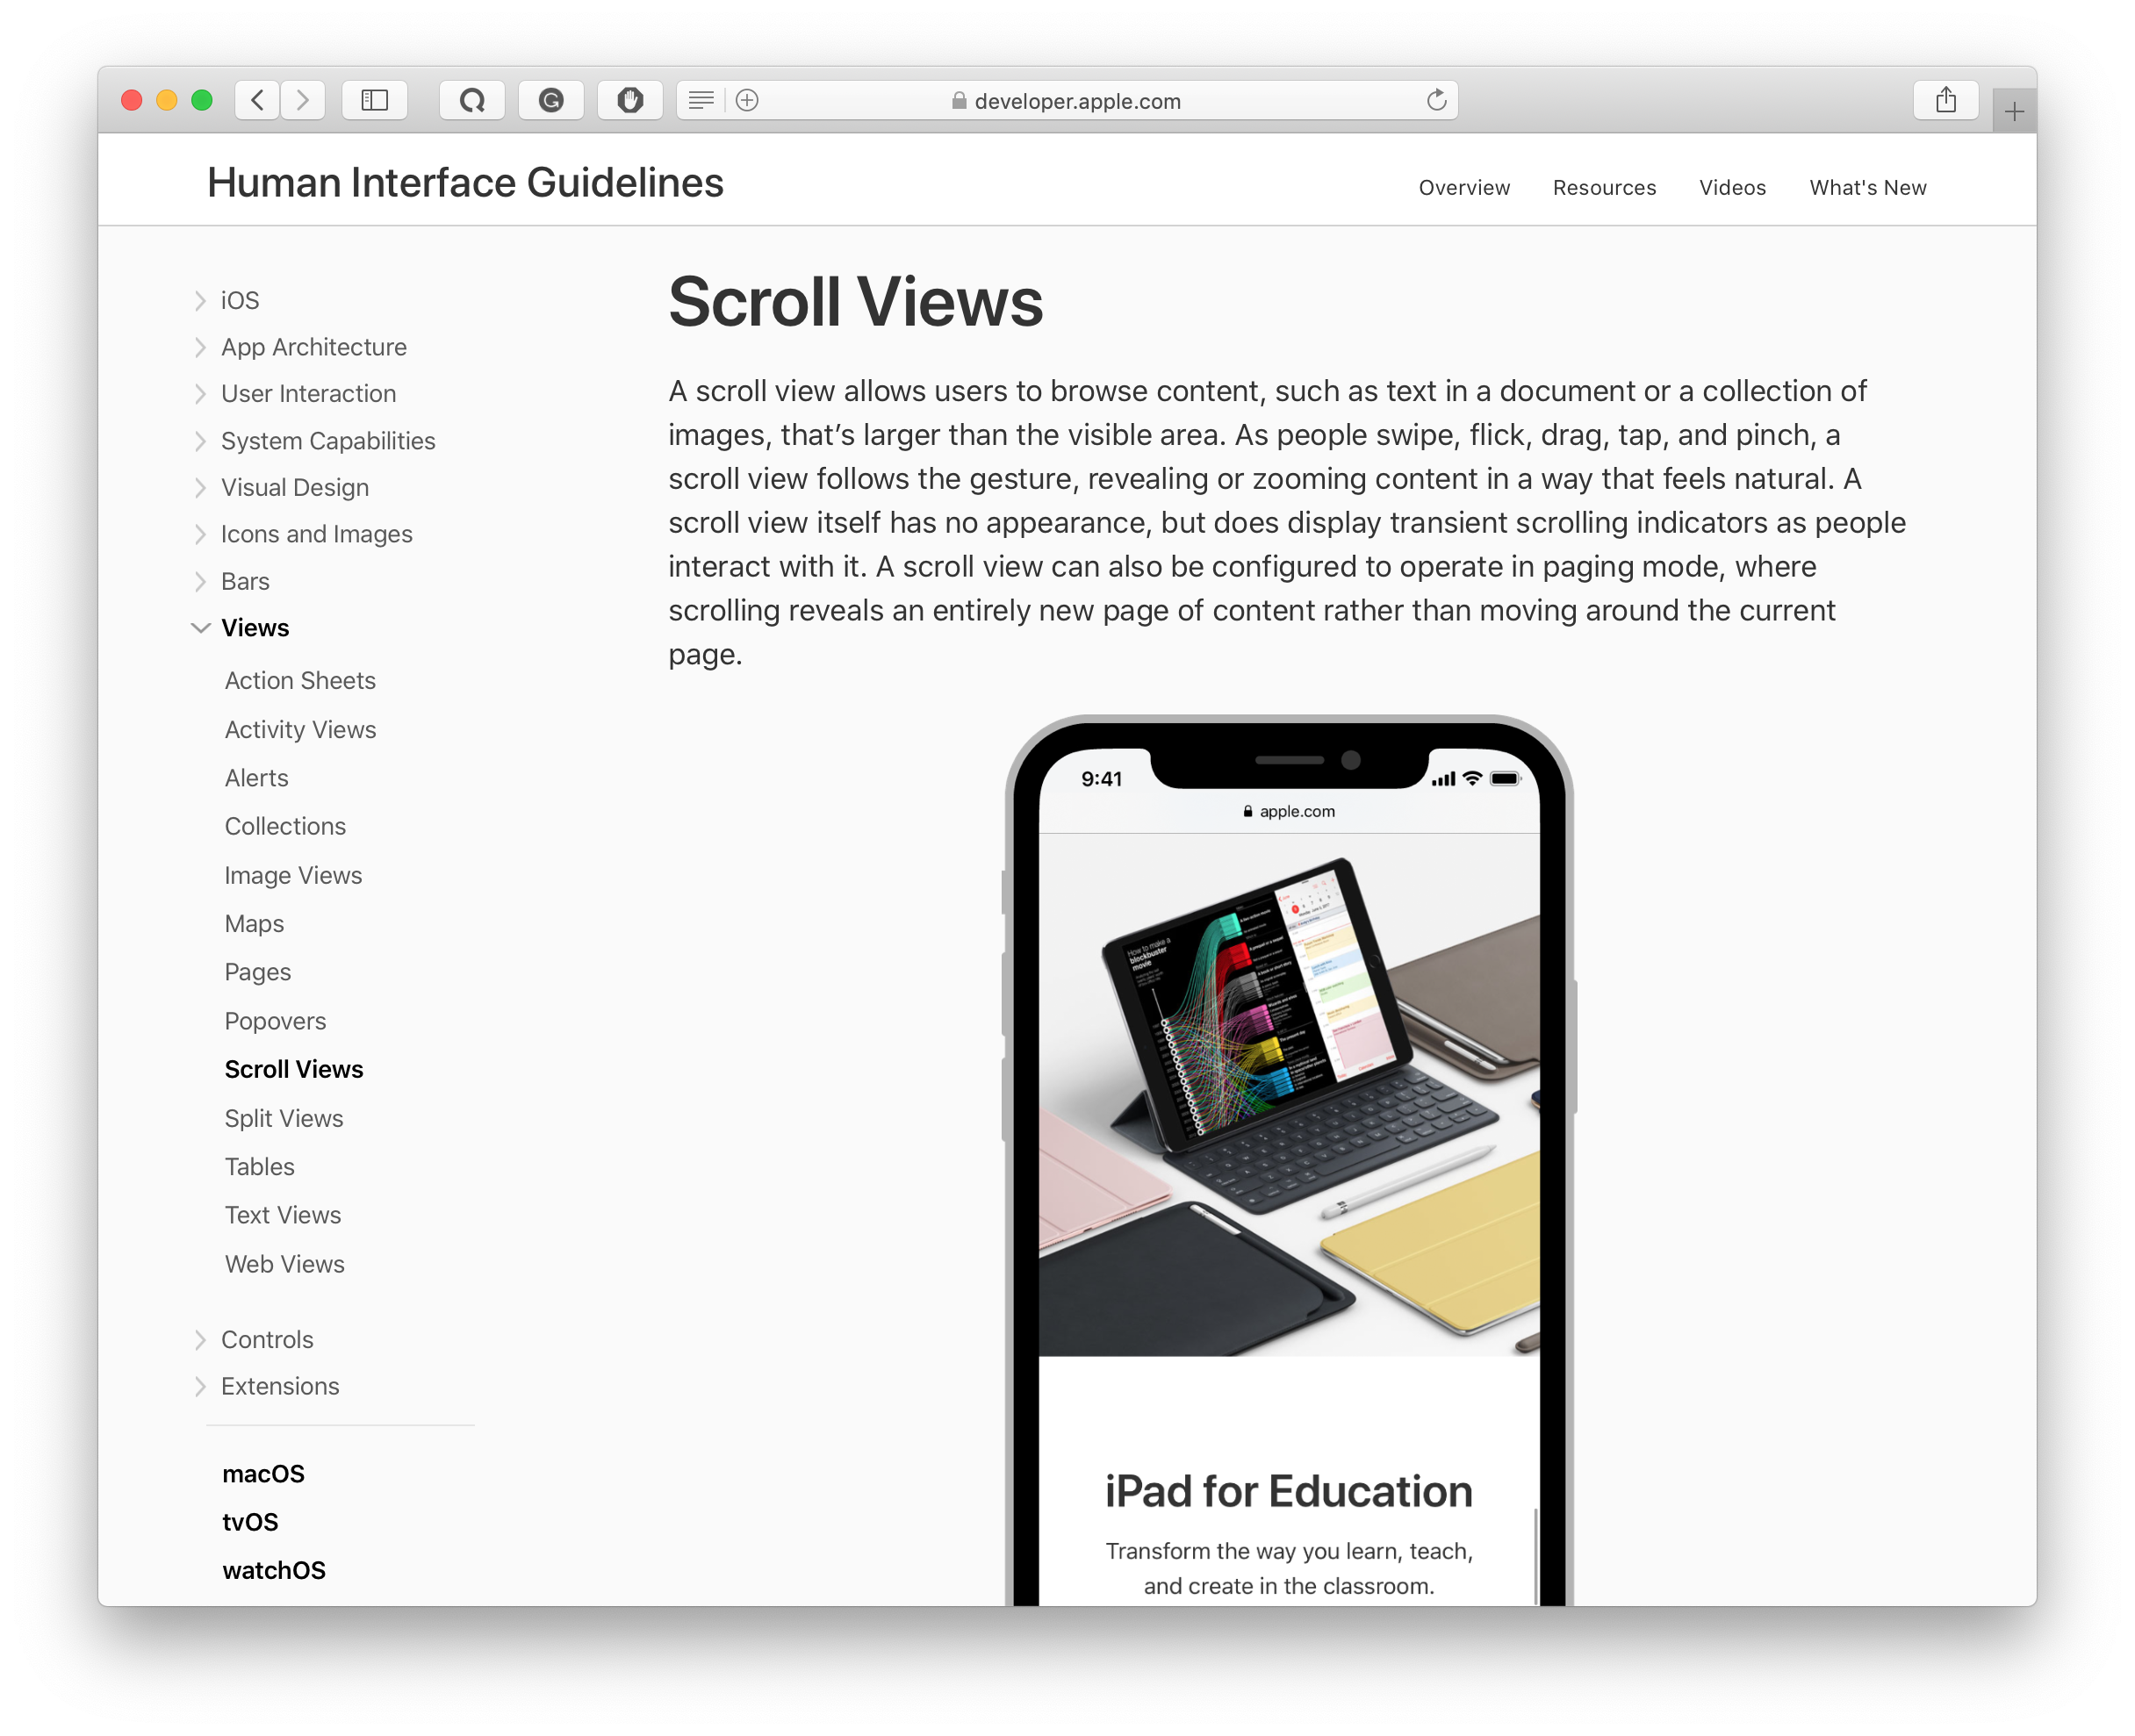 scroll views in apple’s human interface guidelines